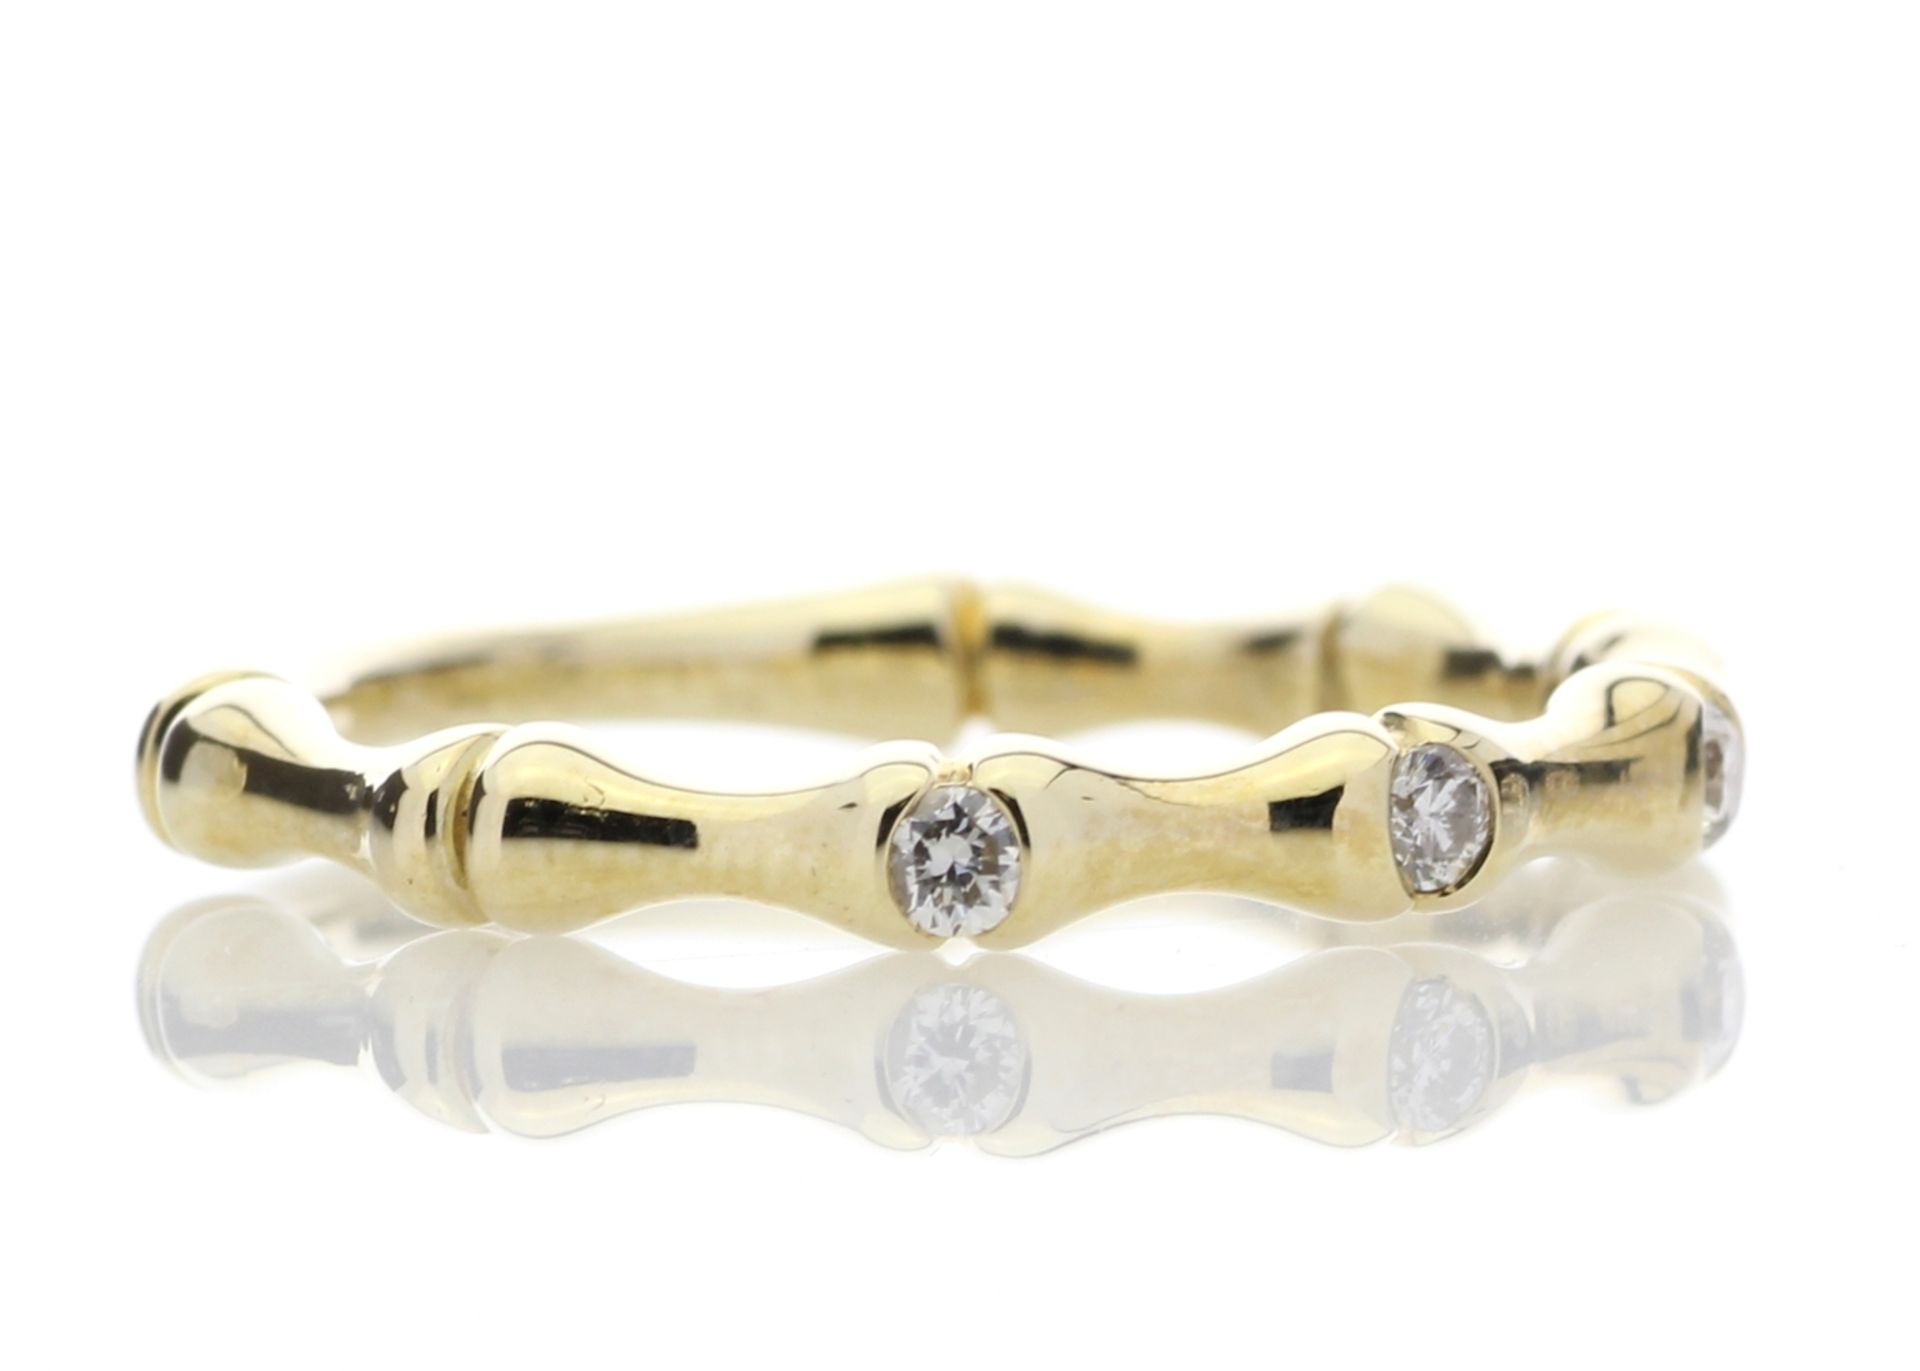 9ct Yellow Gold Diamond Ring 0.12 Carats - Valued by GIE £1,920.00 - 9ct Yellow Gold Diamond Ring - Image 4 of 5